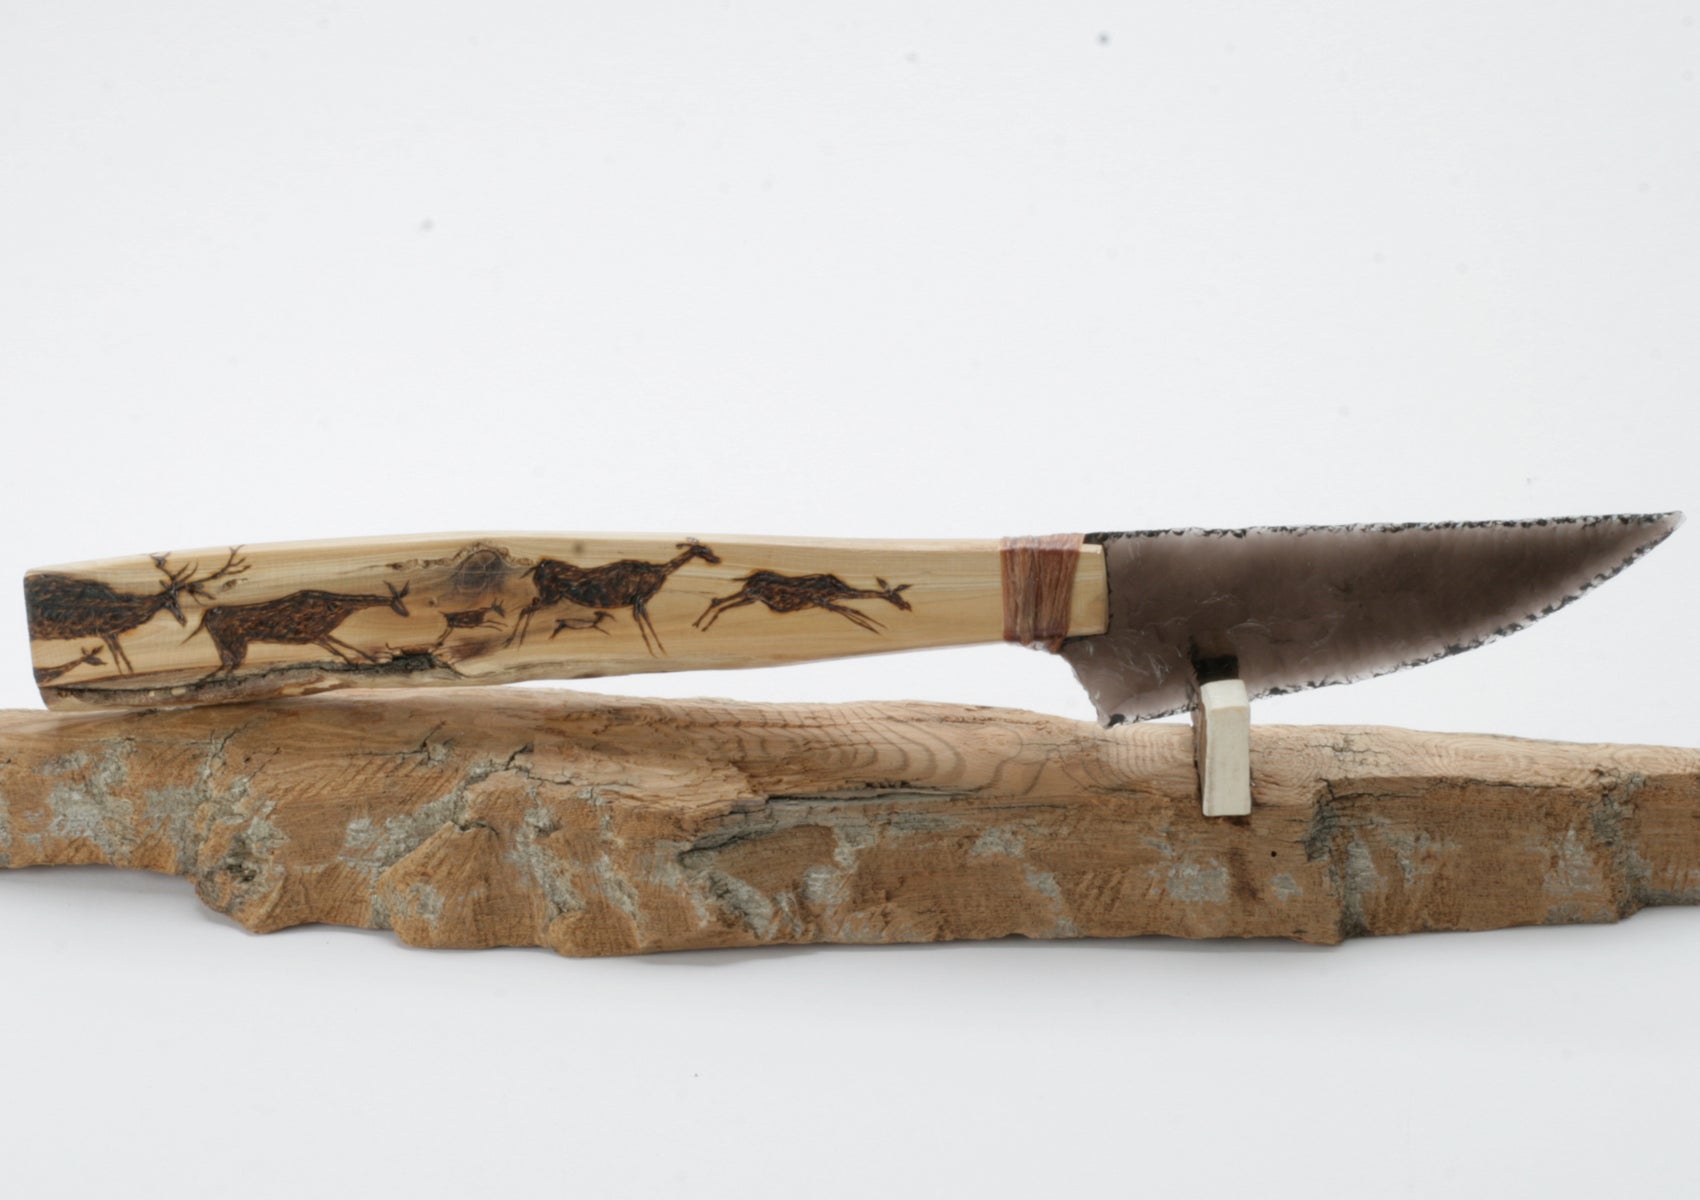 Translucent Obsidian Knife with Woodburned on Drift Wood